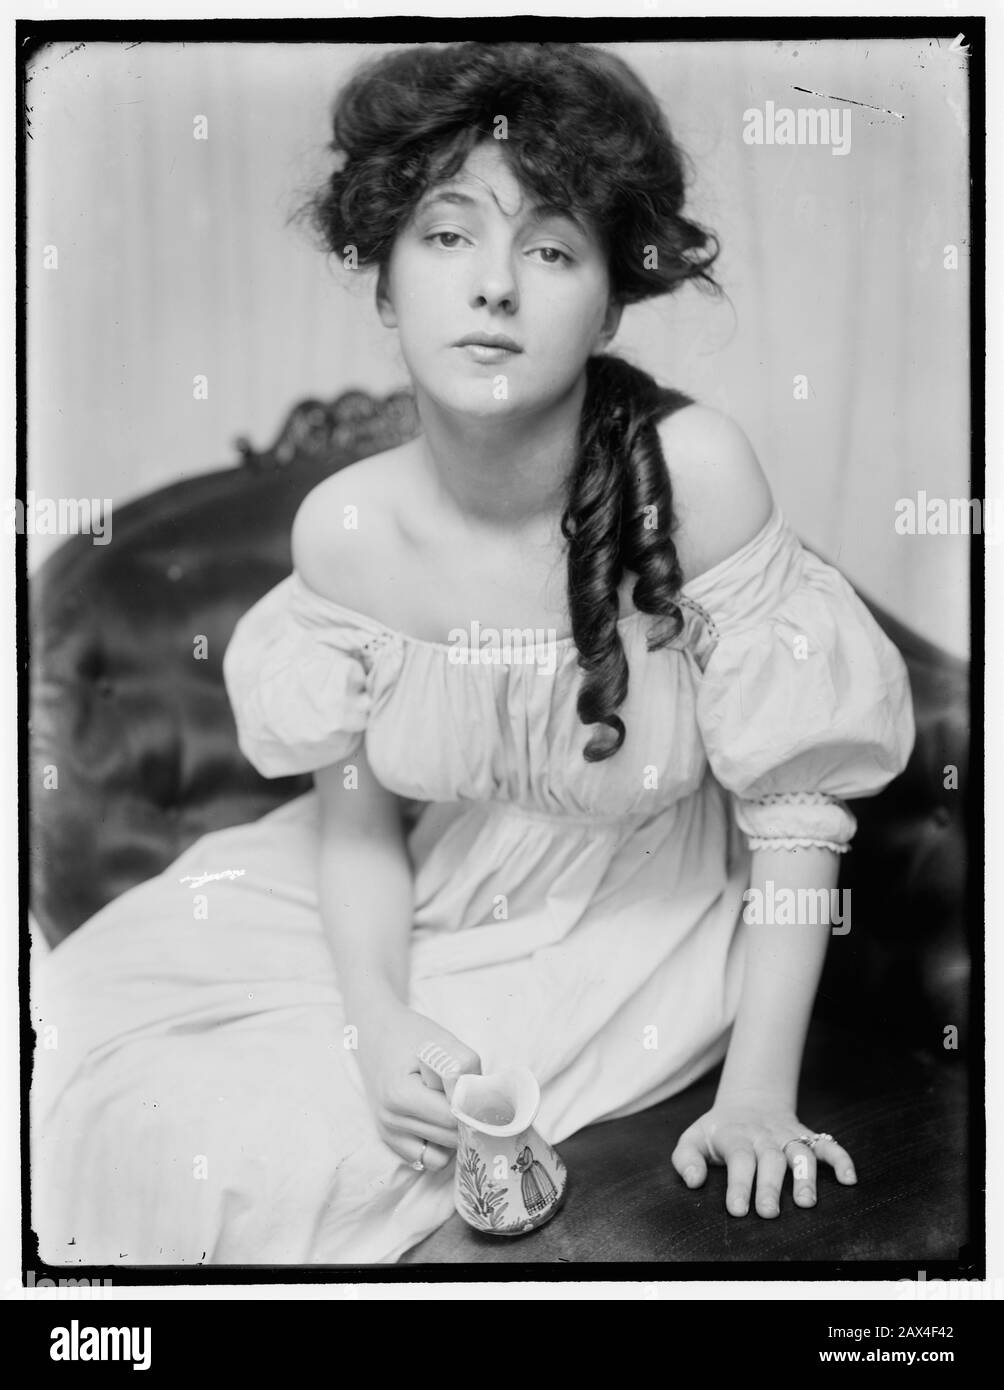 1900 ca , New York , USA : The american theatre stage actress  EVELYN NESBIT ( 1884 - 1967 ) at a time when she was brought to the studio by Stanford White. Photo by  Gertrude KASEBIER ( 1852 - 1934), woman photographer  of CAMERA WORK school .  Evelyn Nesbit was an American artists' model and chorus girl, noted for her entanglement in the murder of her ex-lover, architect  Stanford White , by her first husband, Harry Kendall Thaw . - attrice - TEATRO - THEATER - DIVA - DIVINA - BROADWAY -  BELLE EPOQUE  - PORTRAIT - RITRATTO - BEAUTIFUL WOMAN - BELLA BELLISSIMA DONNA - curls - boccolo boccoli Stock Photo